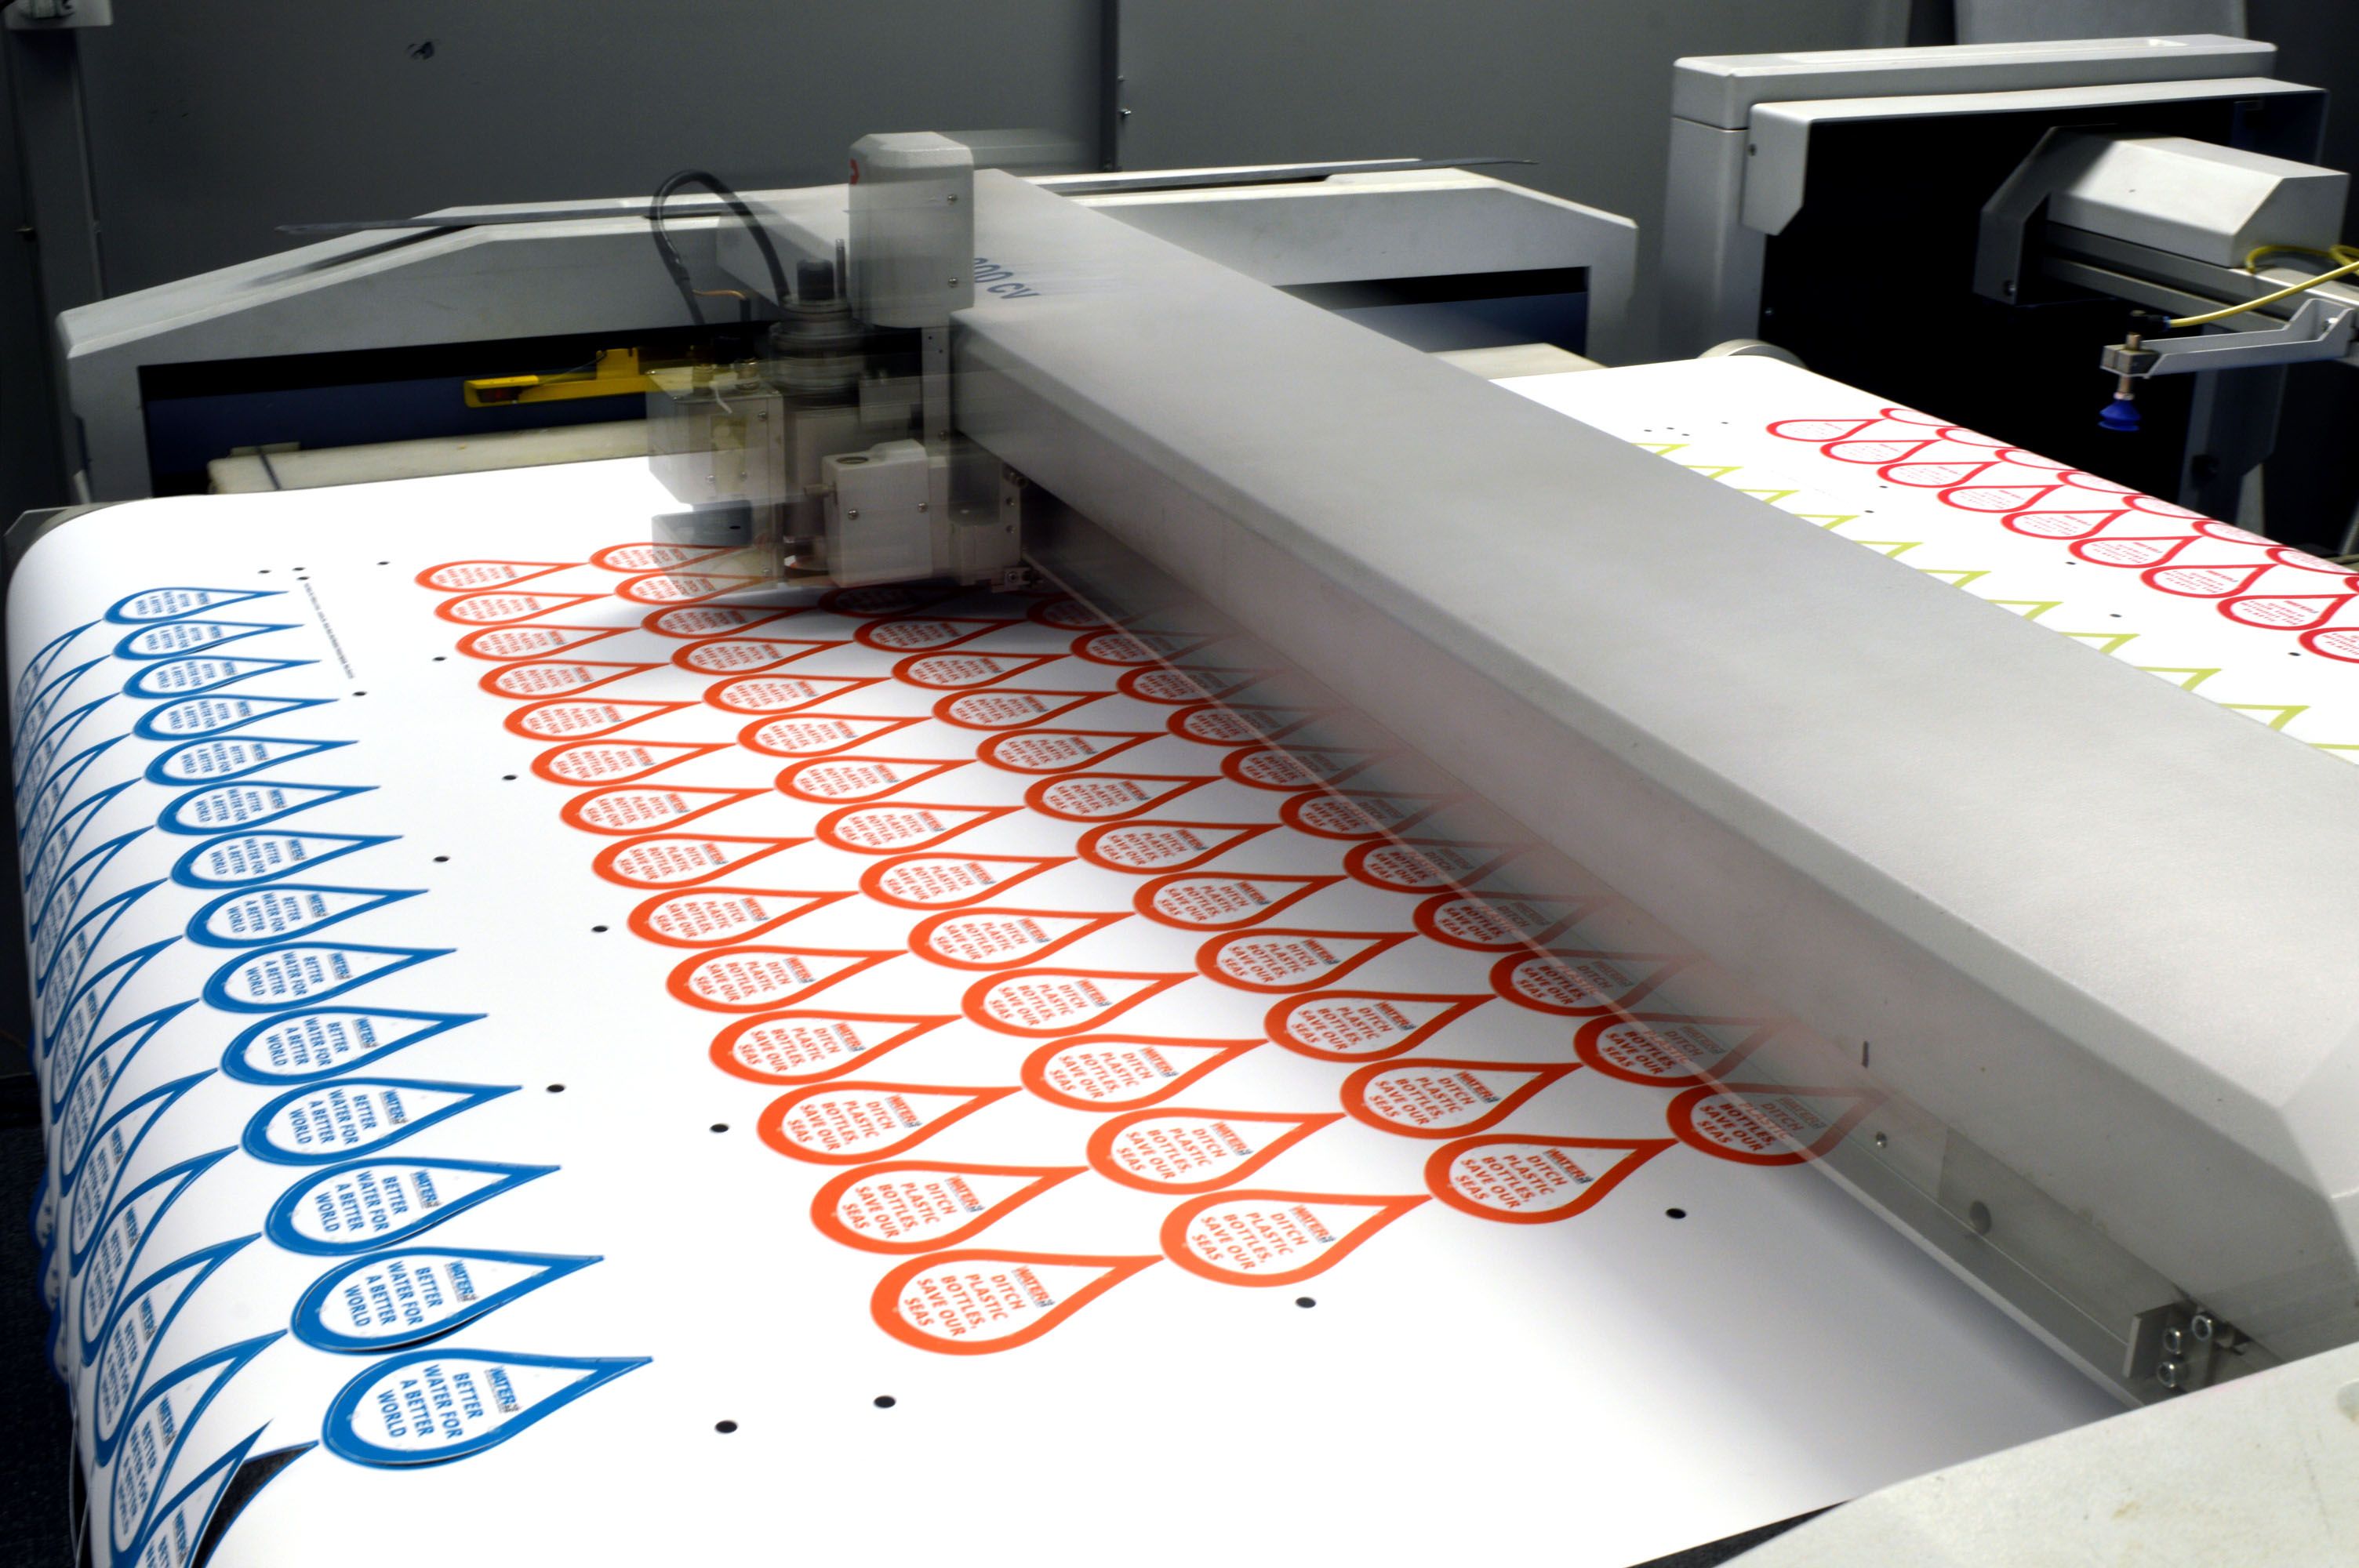 Custom_stickers_being_printed_on_a_flatbed_cutter.jpg